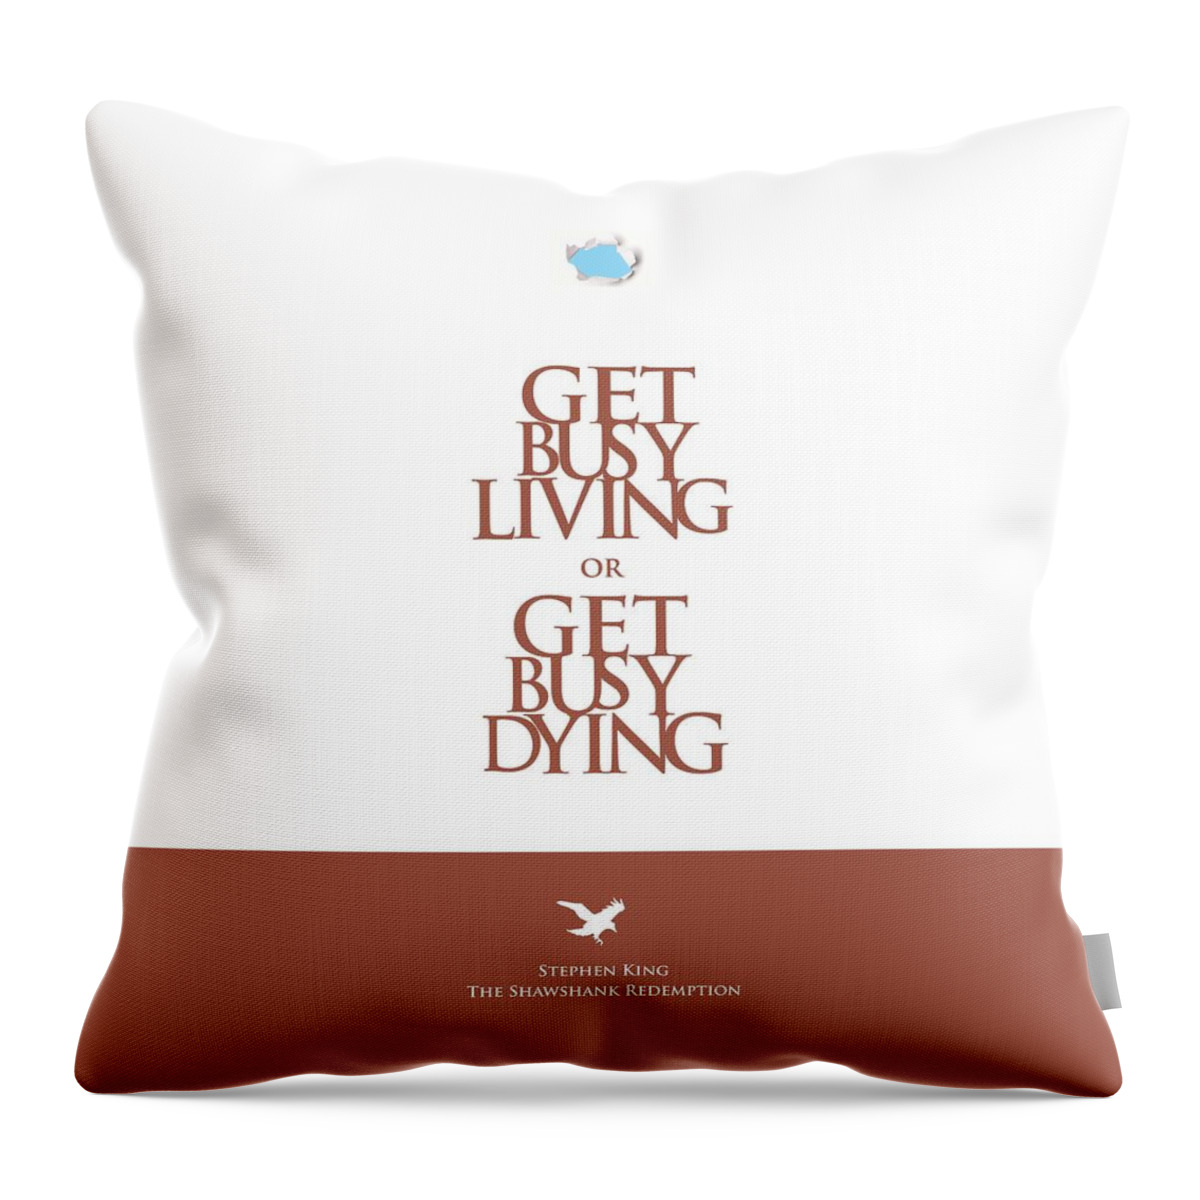 Modern Print Art Throw Pillow featuring the digital art Stephen King Shawshank Redemption movie poster by Lab No 4 - The Quotography Department